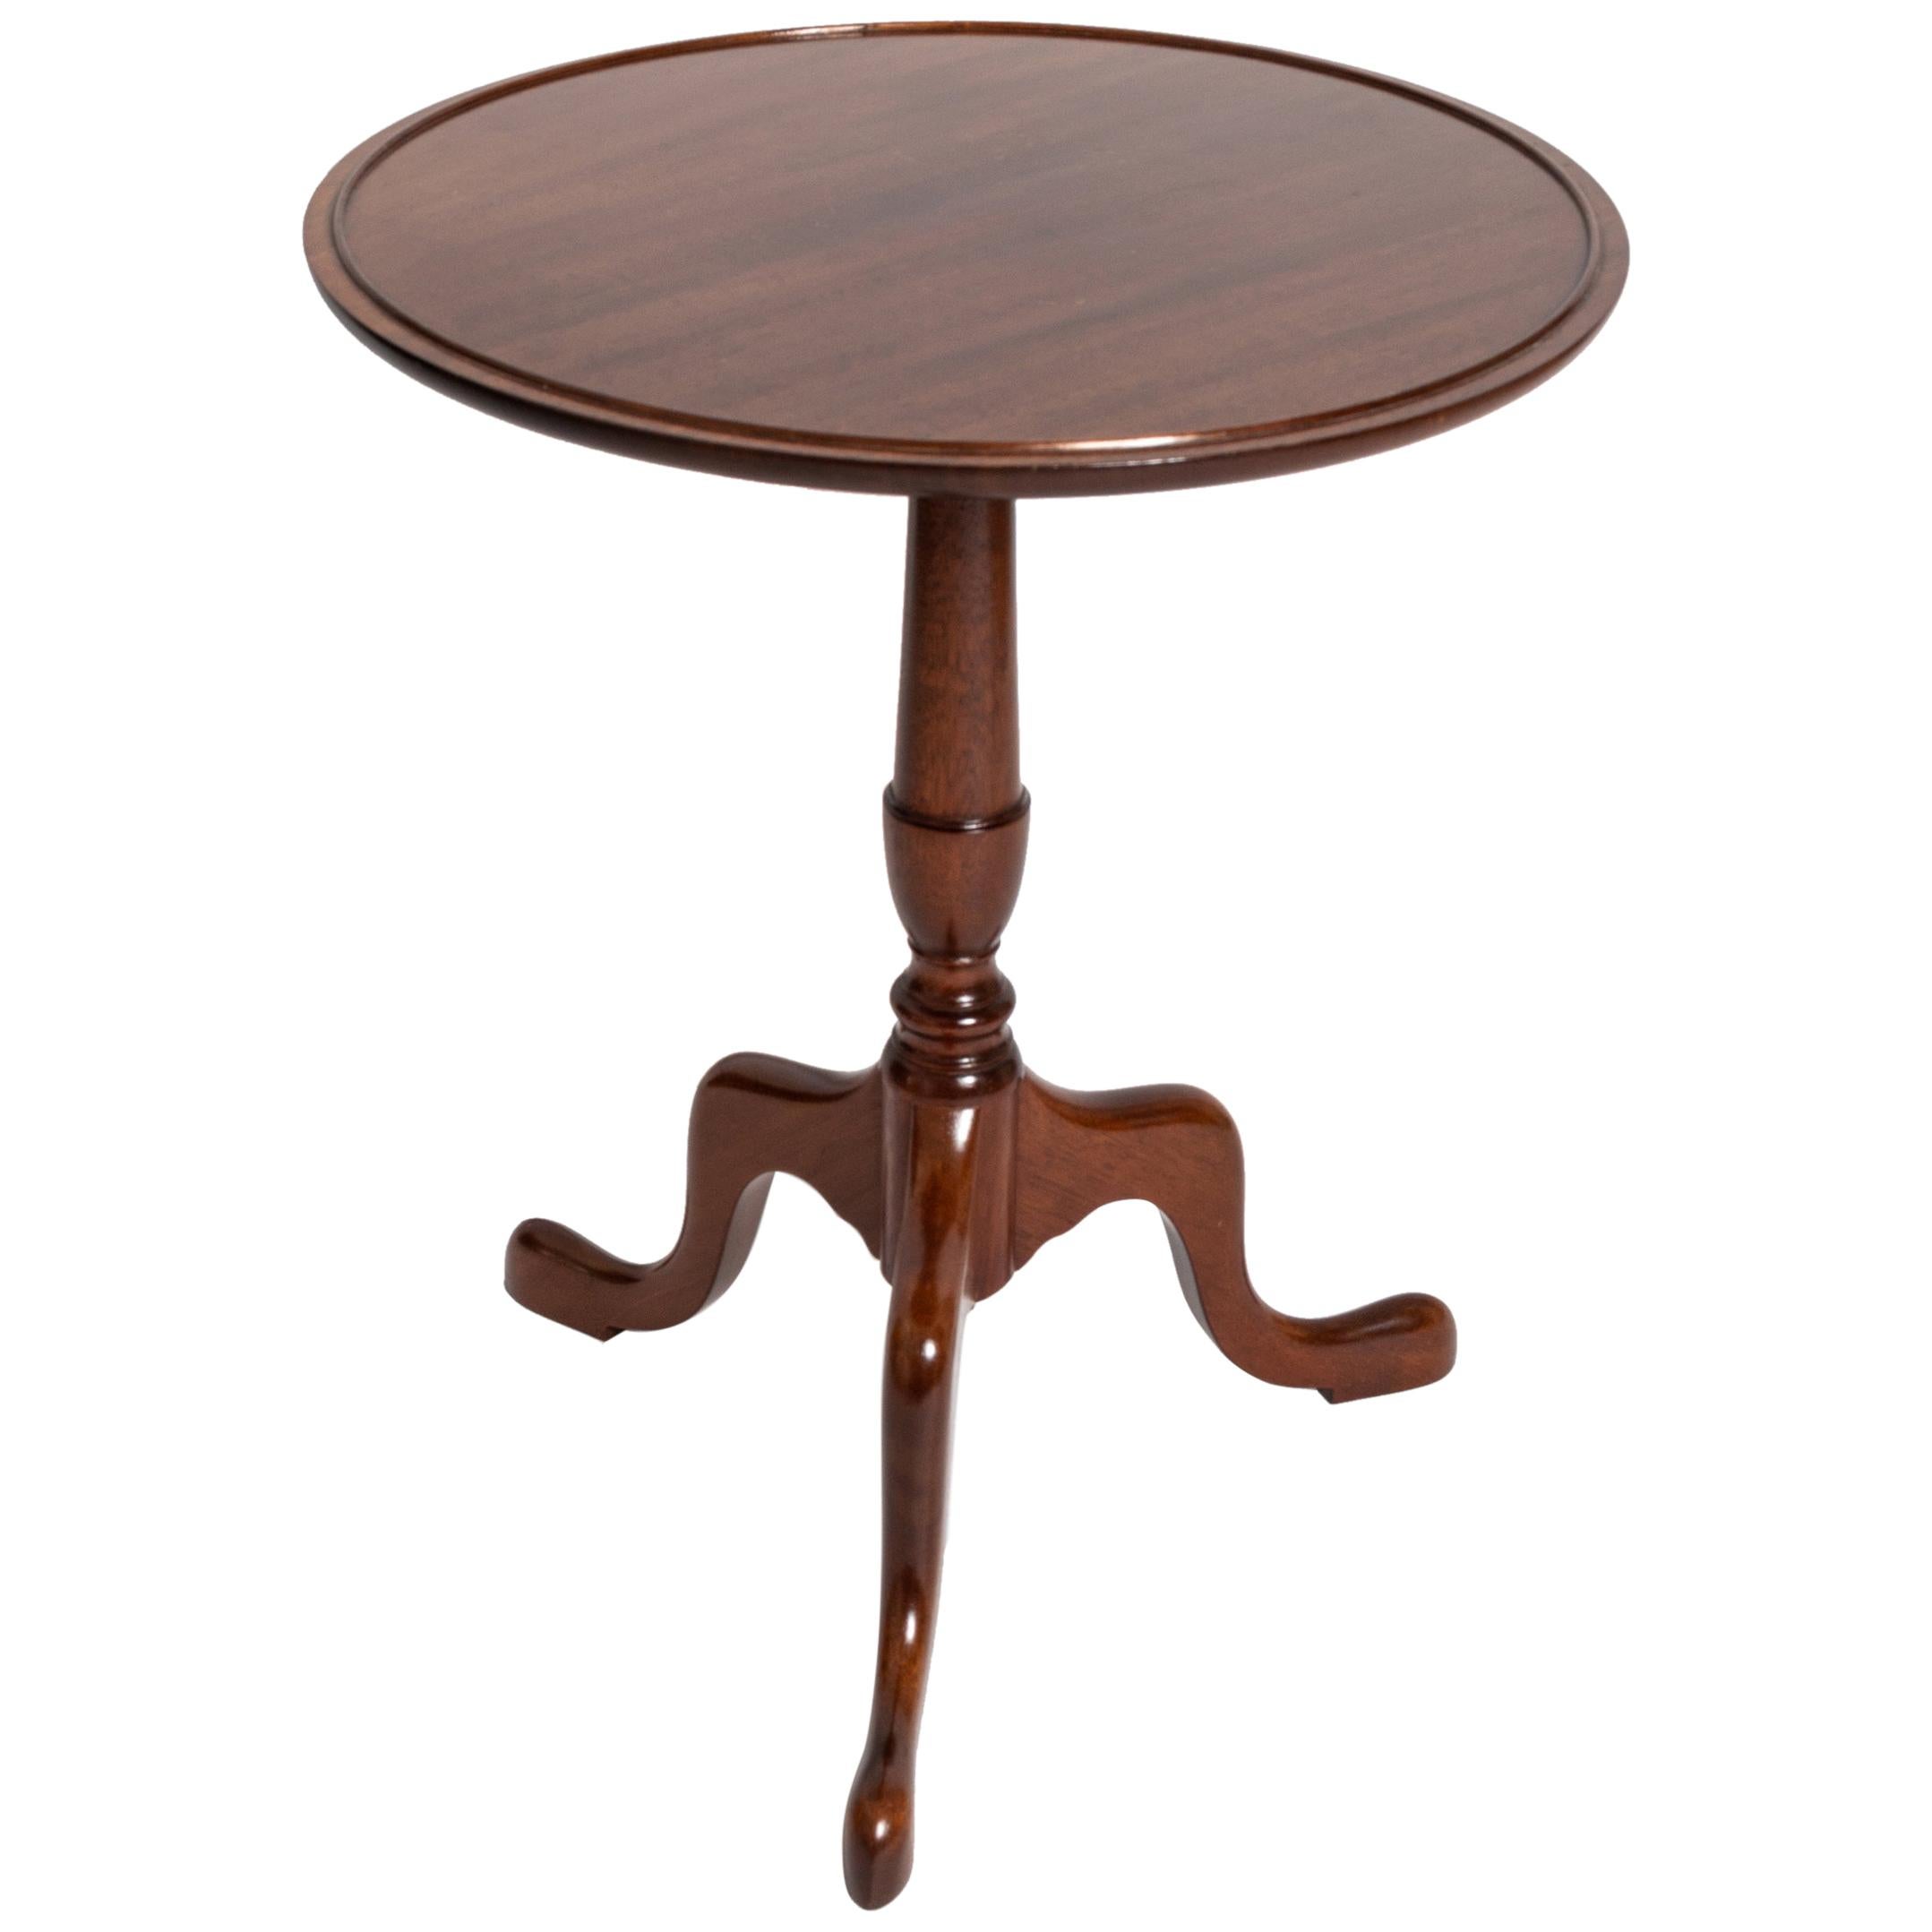 Antique Georgian Style Mahogany Tripod Side Table by Redman & Hales, England